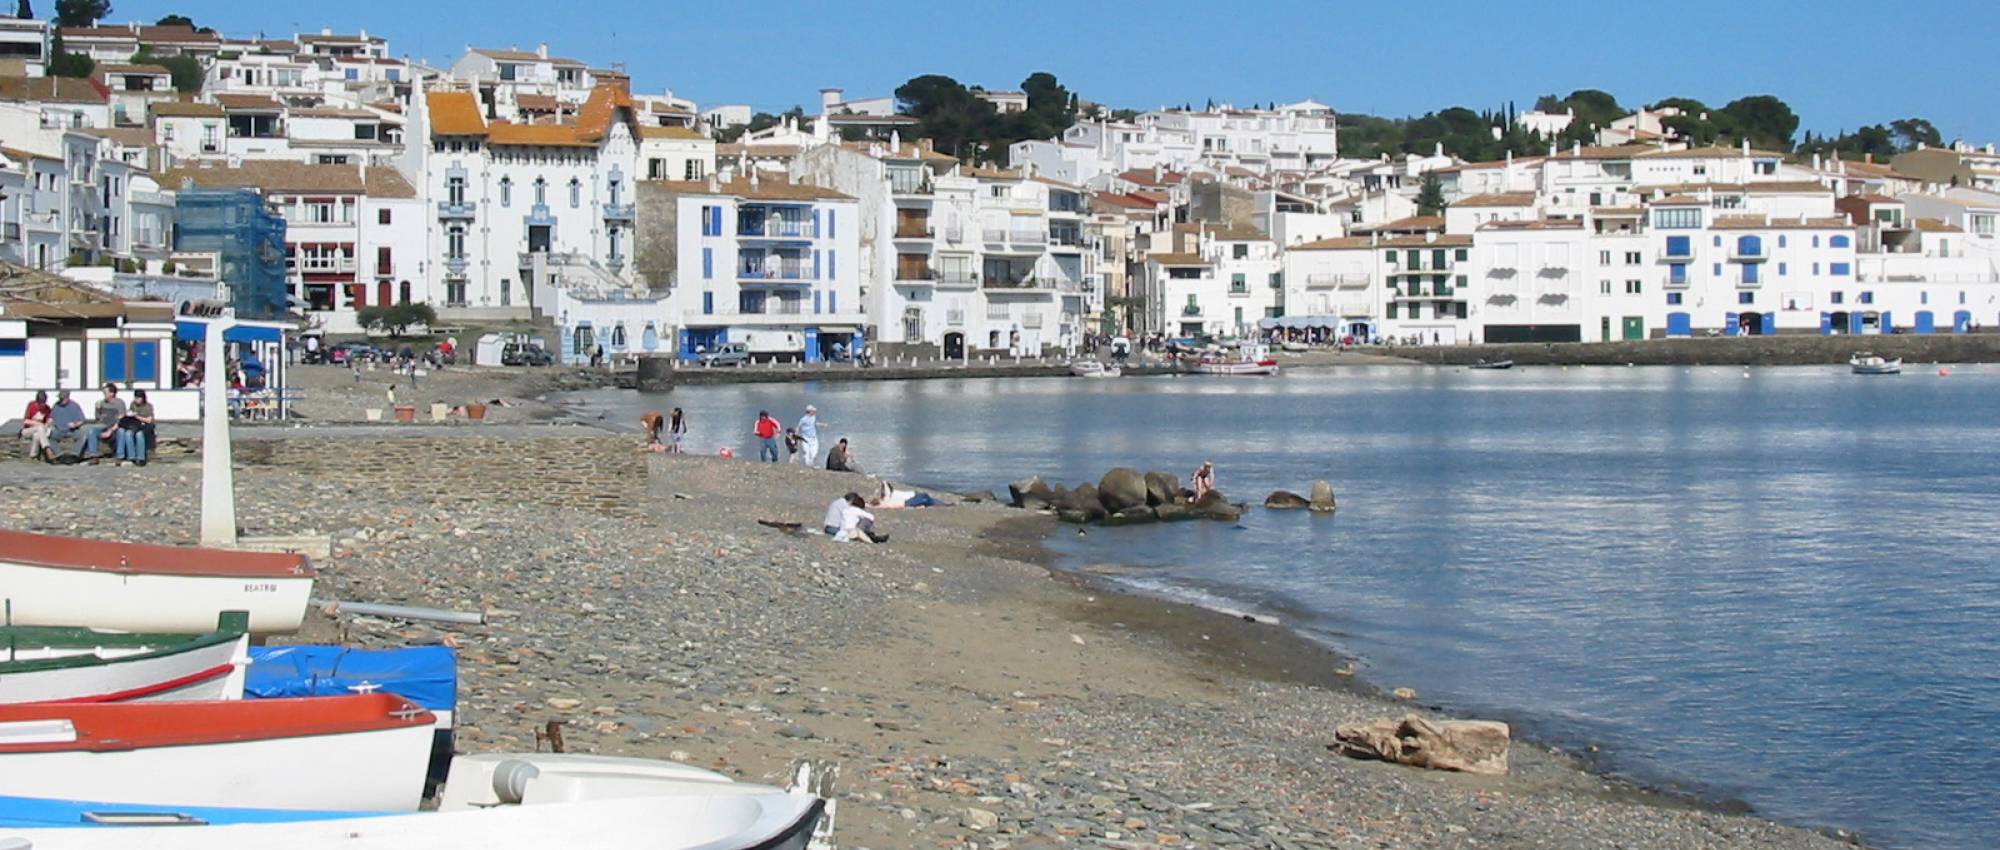 View of Cadaqués from the beach. CC BY-SA 3.0 - Gabriele Deley/ Wikimedia Commons